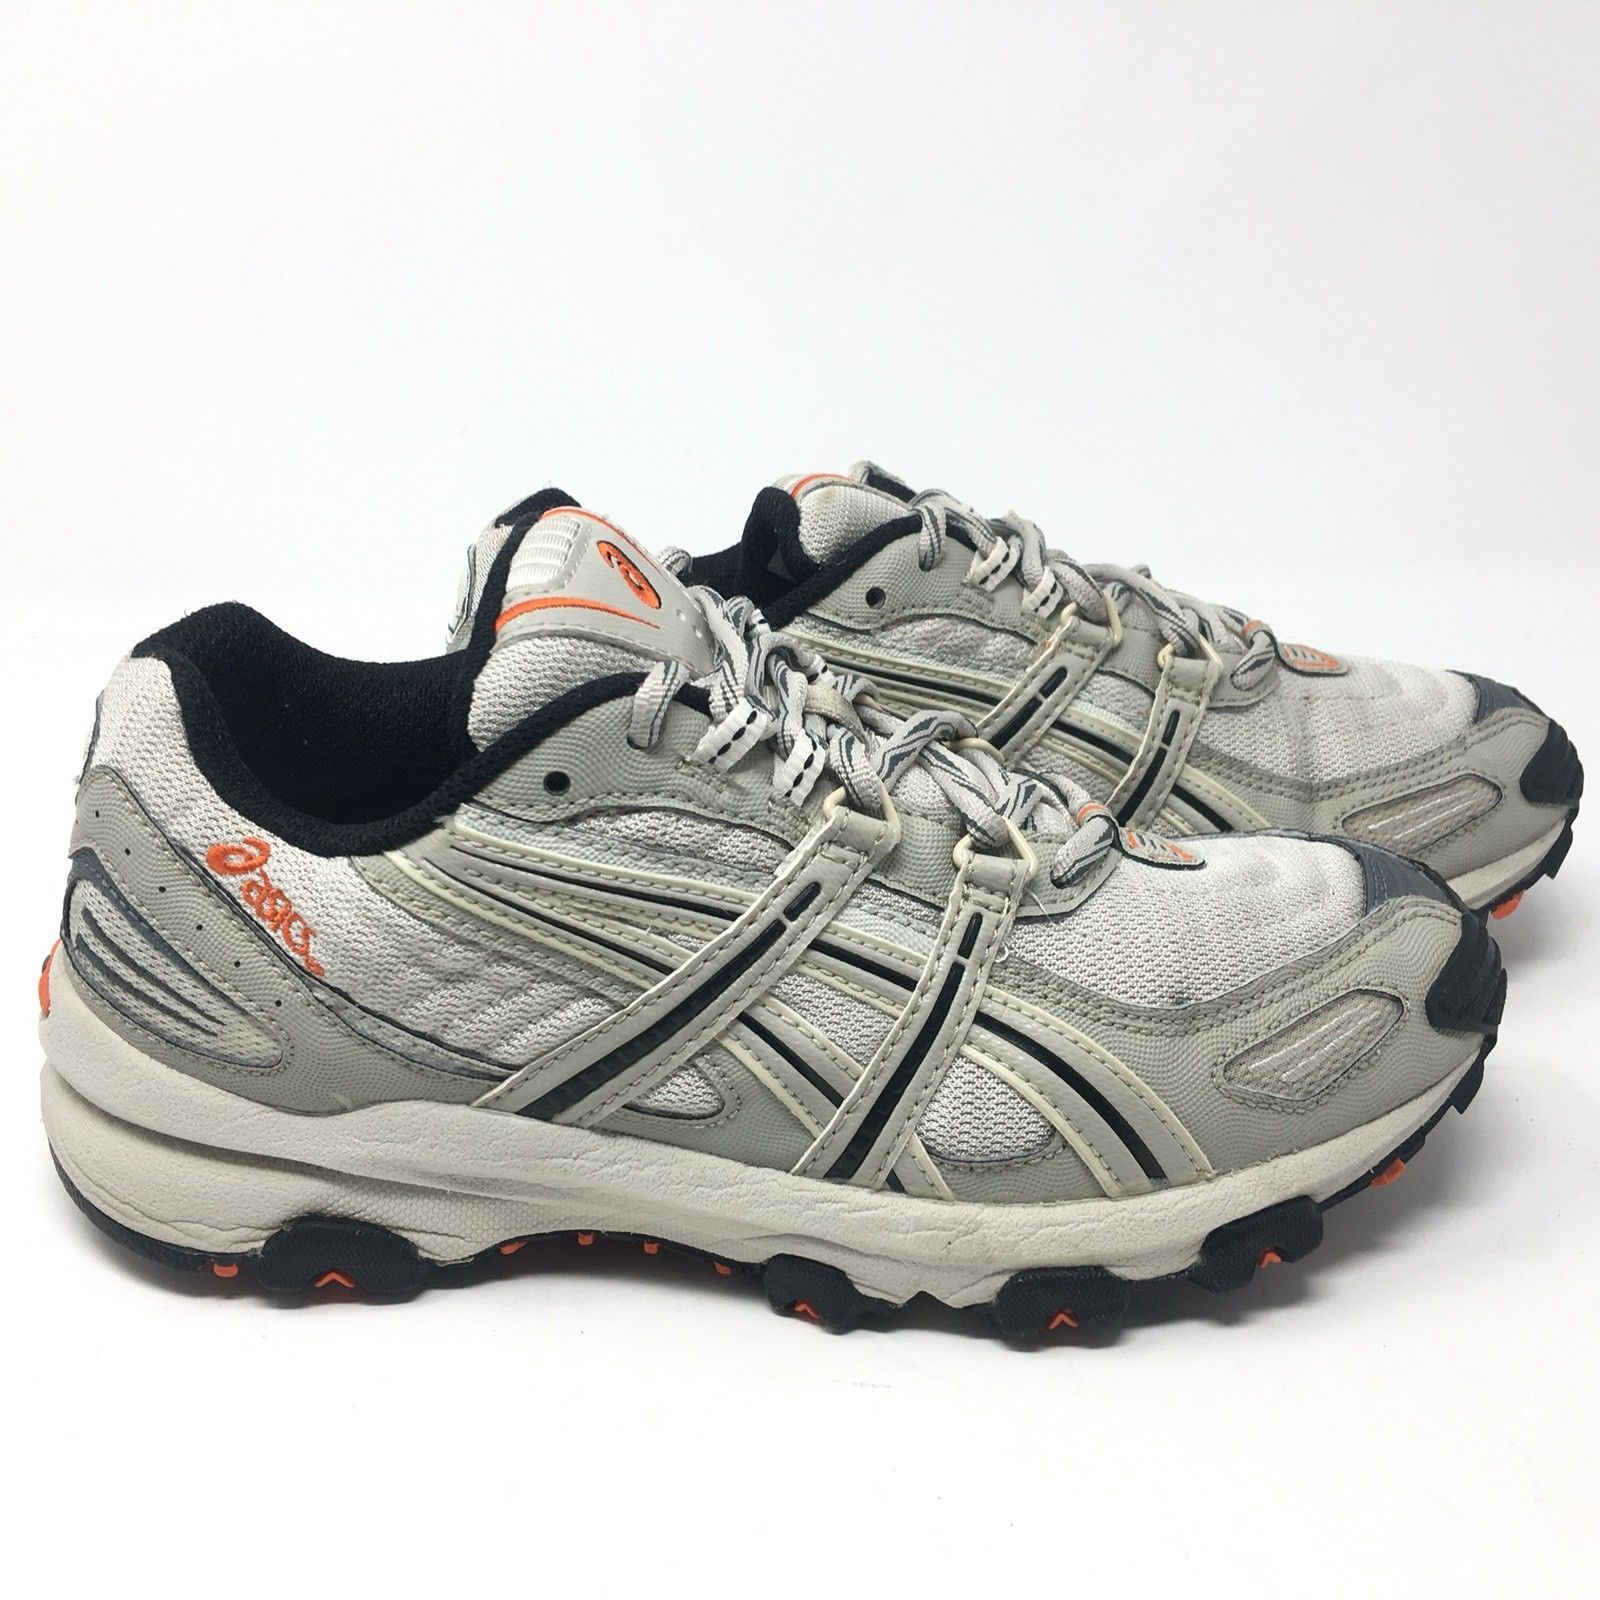 asics ahar | Welcome to buy